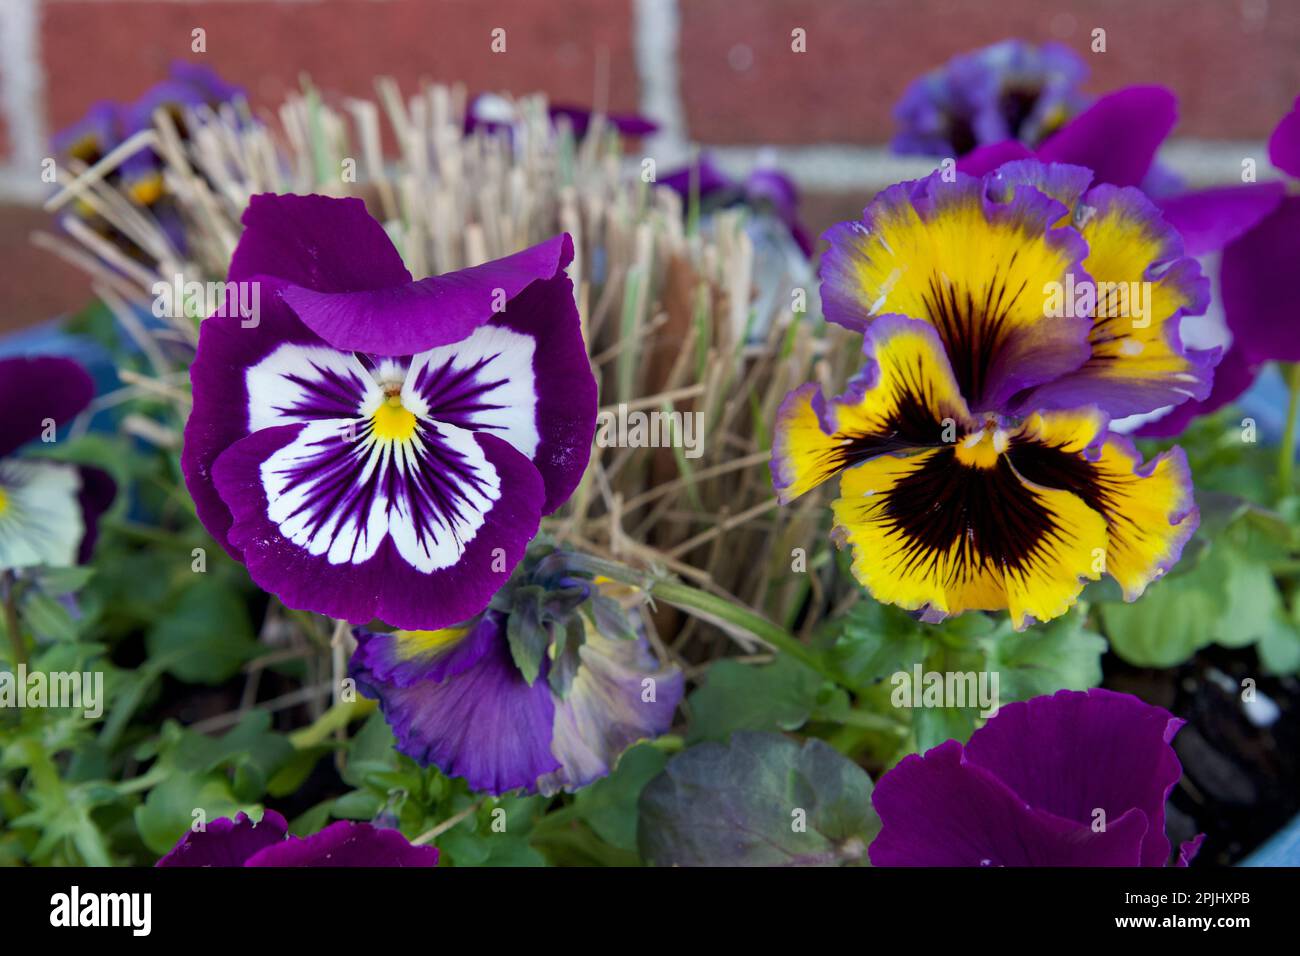 Close up of pansies with purple, white, and yellow. Also known as viola and violet. With red brick background. Shows edge of blue pot. Stock Photo